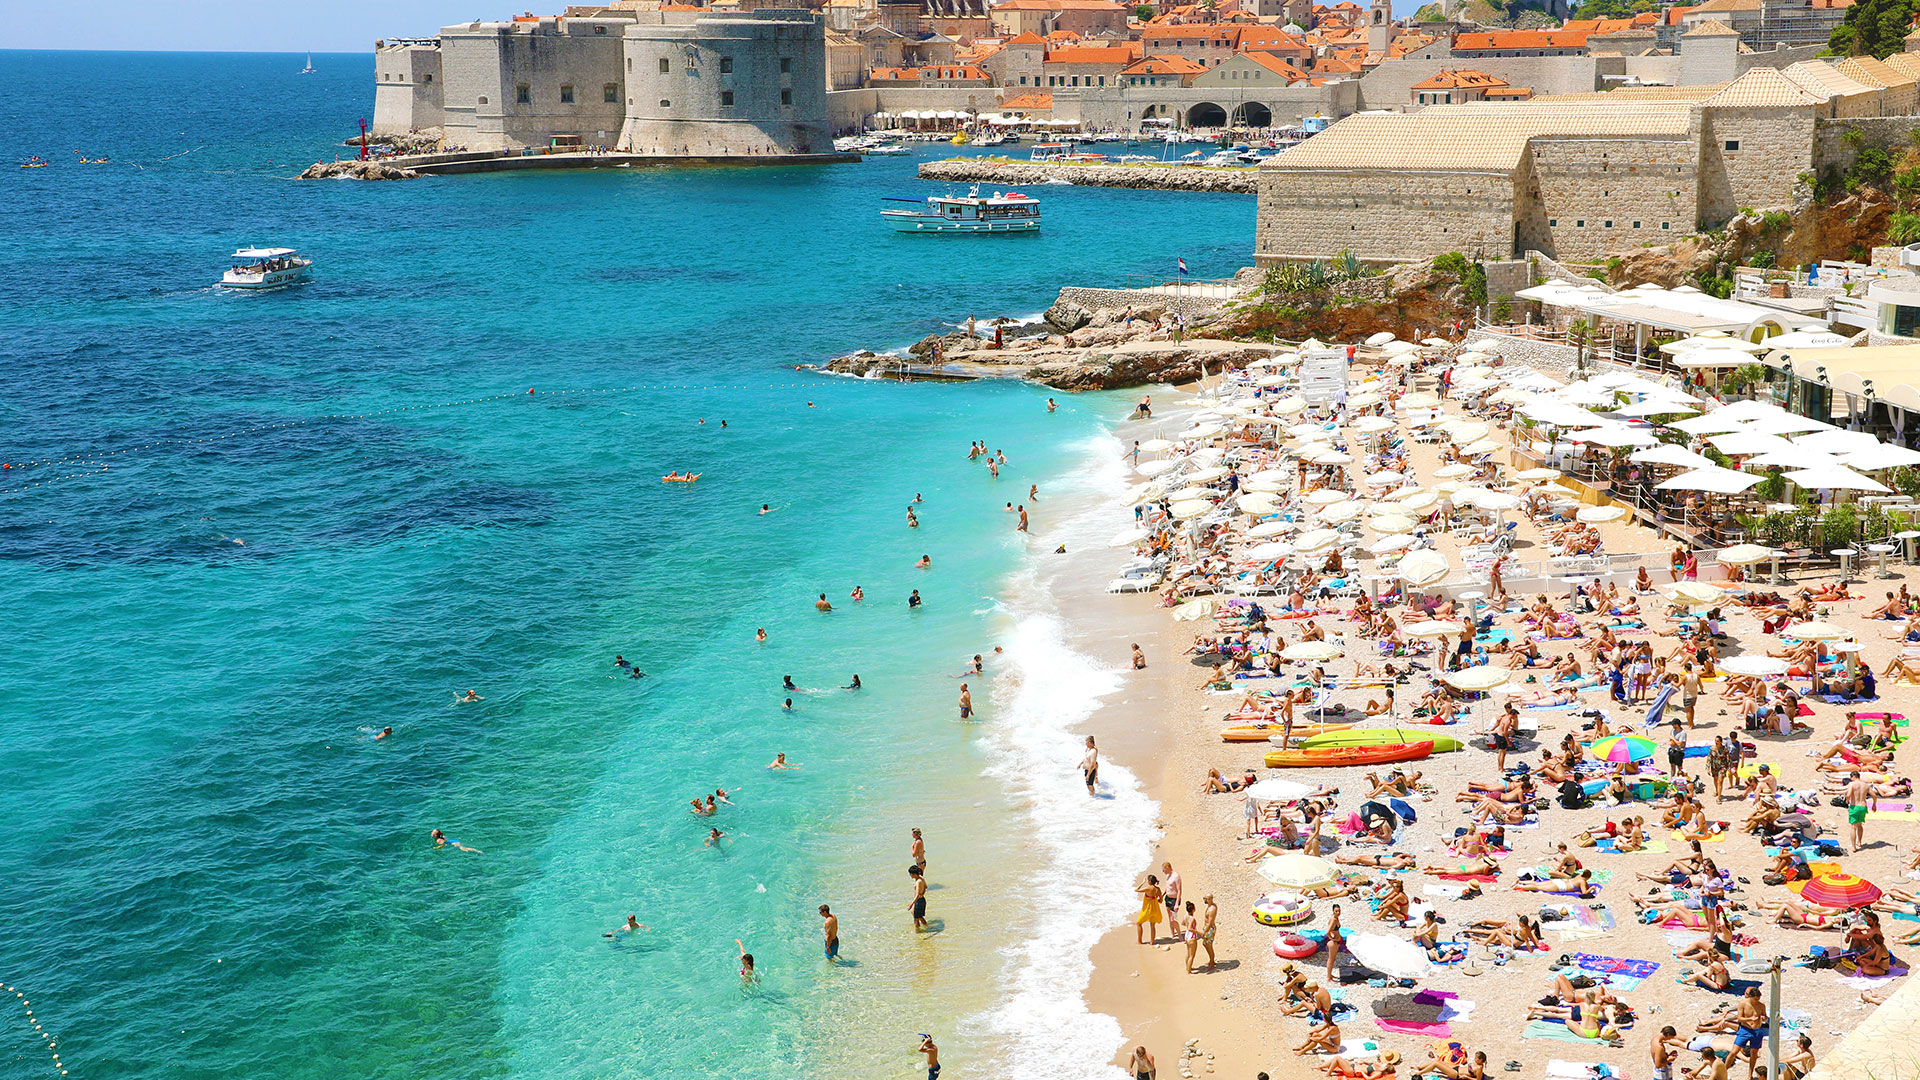 Croatia set to record 20 million visitors – the places most visited in 2023 | Serbia Visit